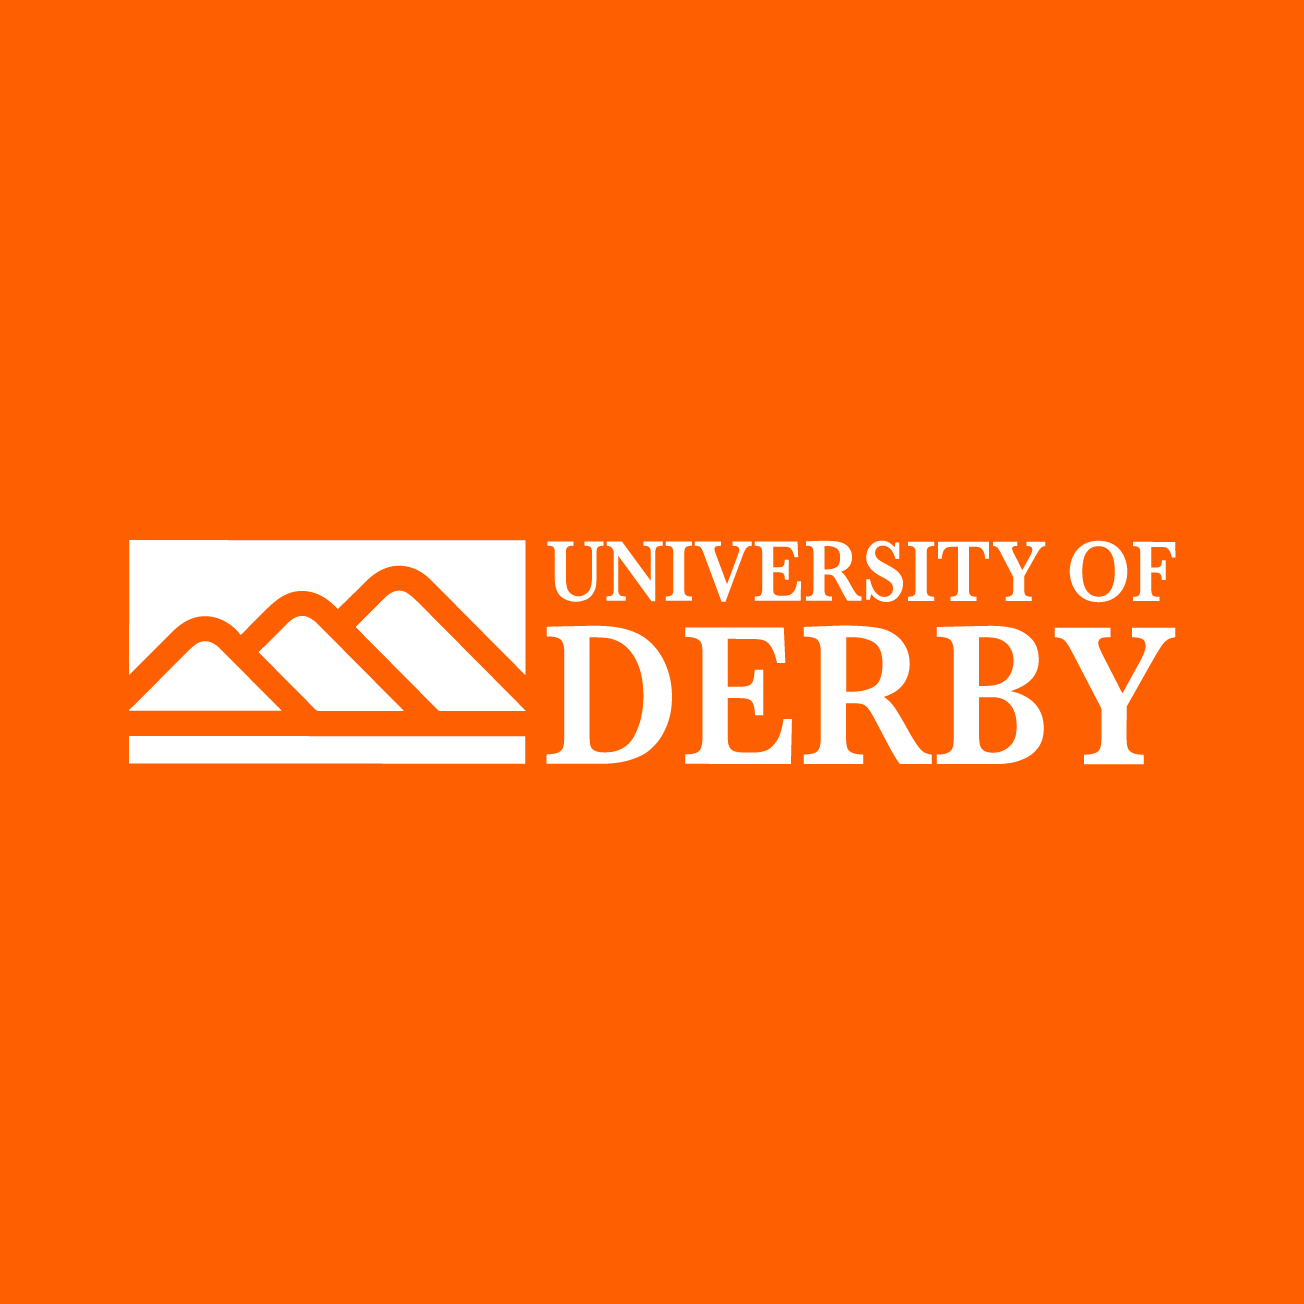 Club Image for UNIVERSITY OF DERBY